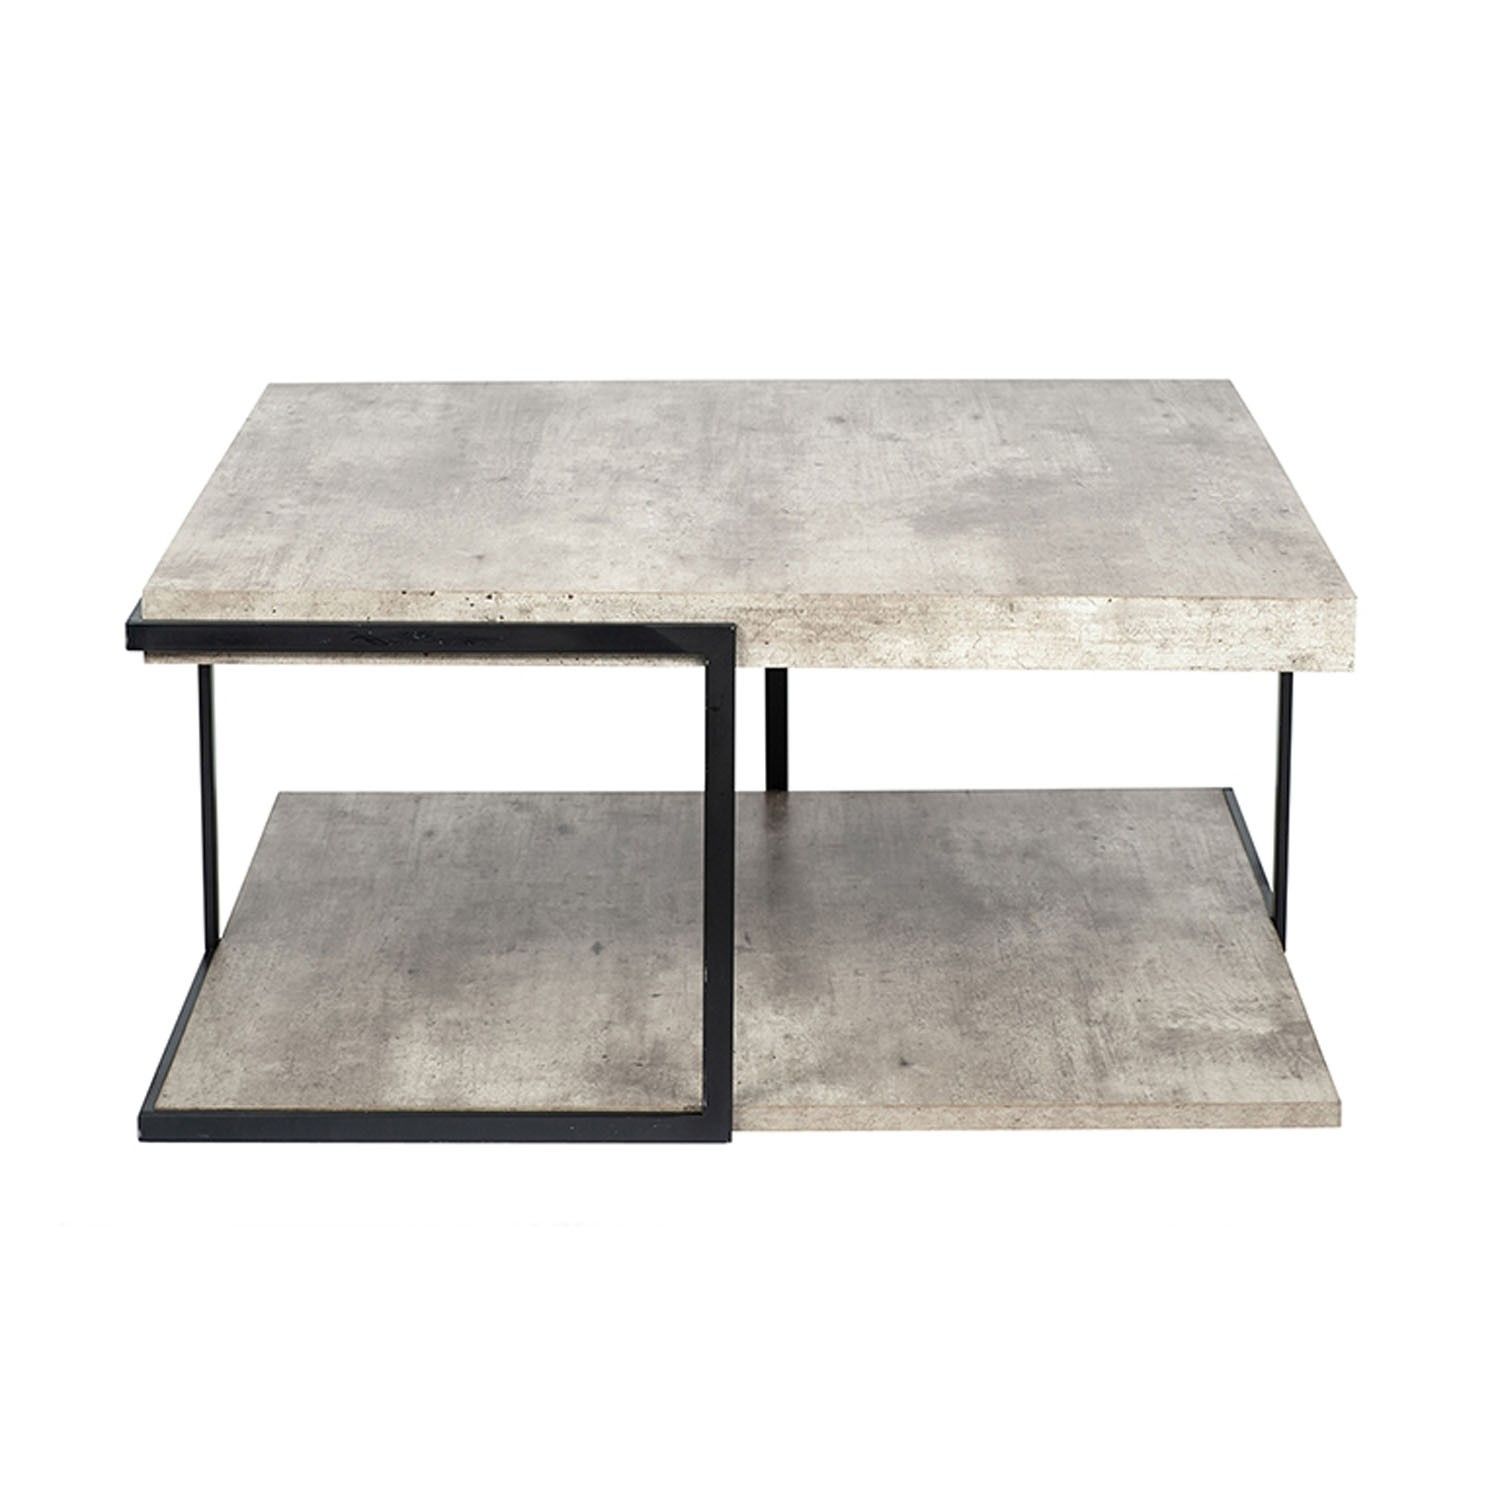 Pacific Concrete Effect Coffee Table, Grey | Leekes Intended For Gray And Black Coffee Tables (View 15 of 15)